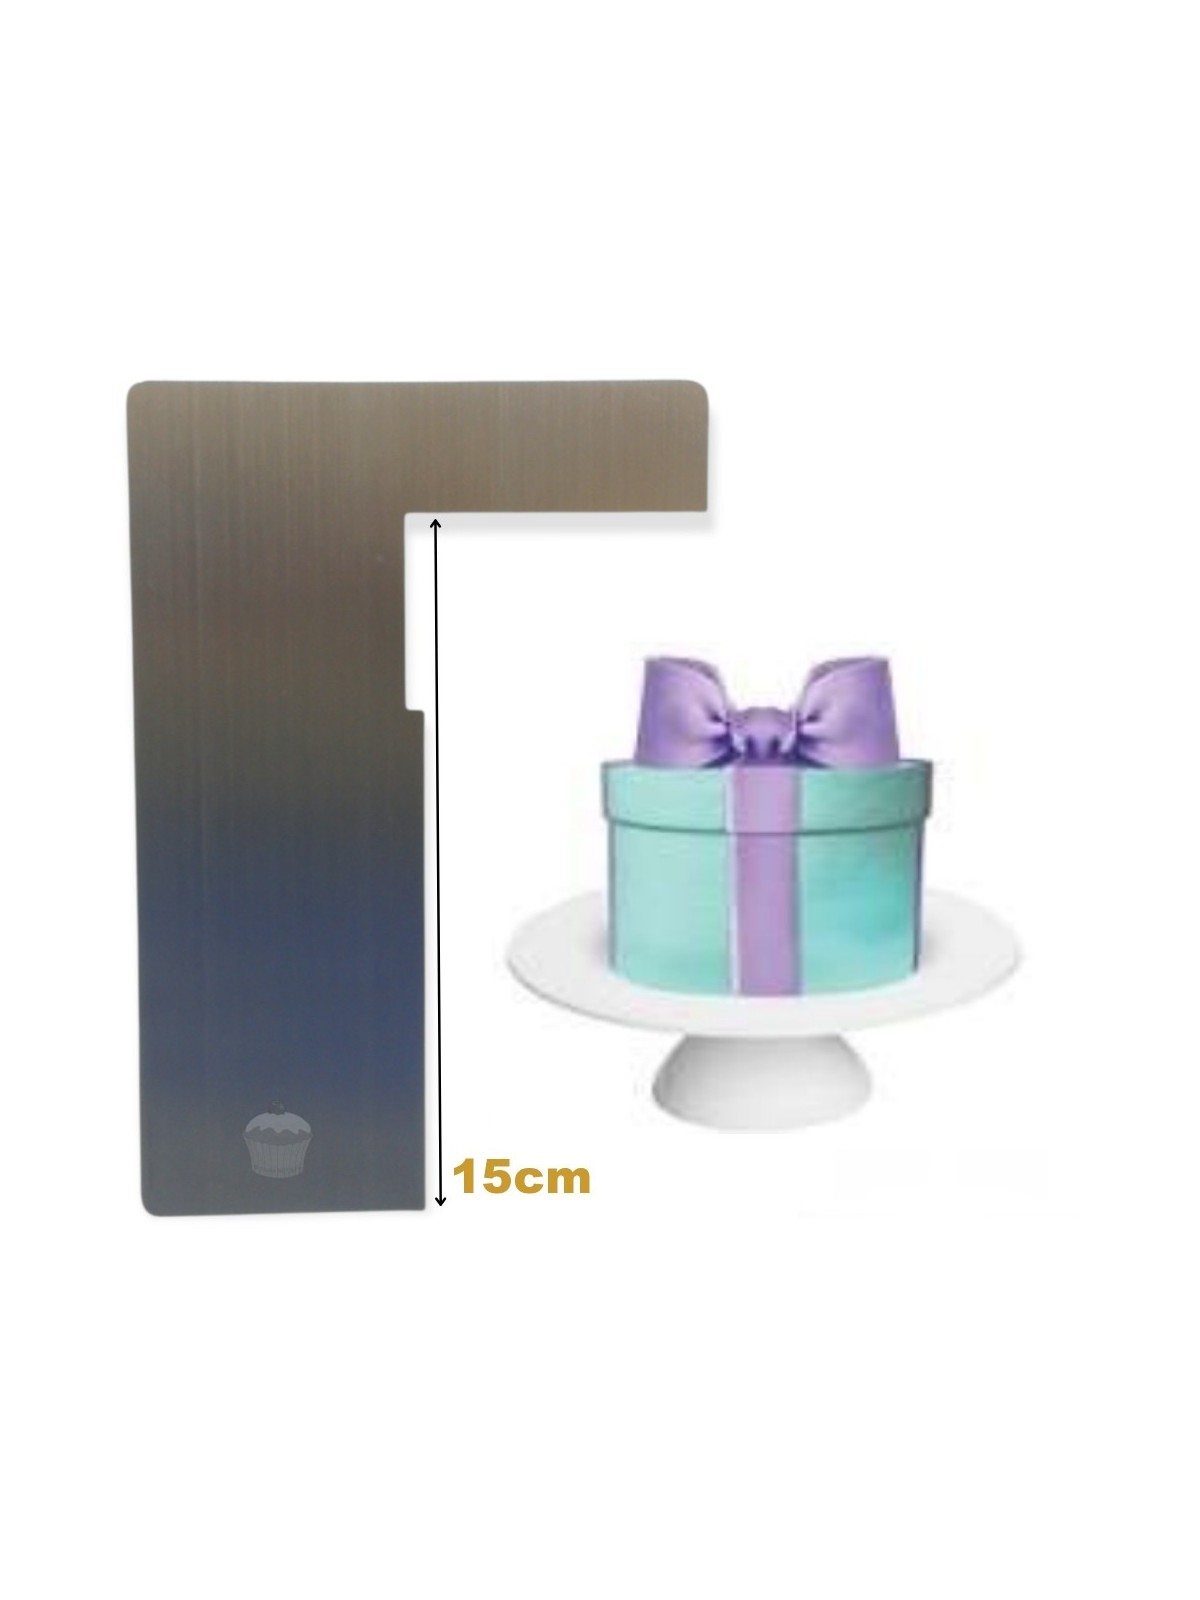 Confectionery contour card made of stainless steel - box 15 cm high